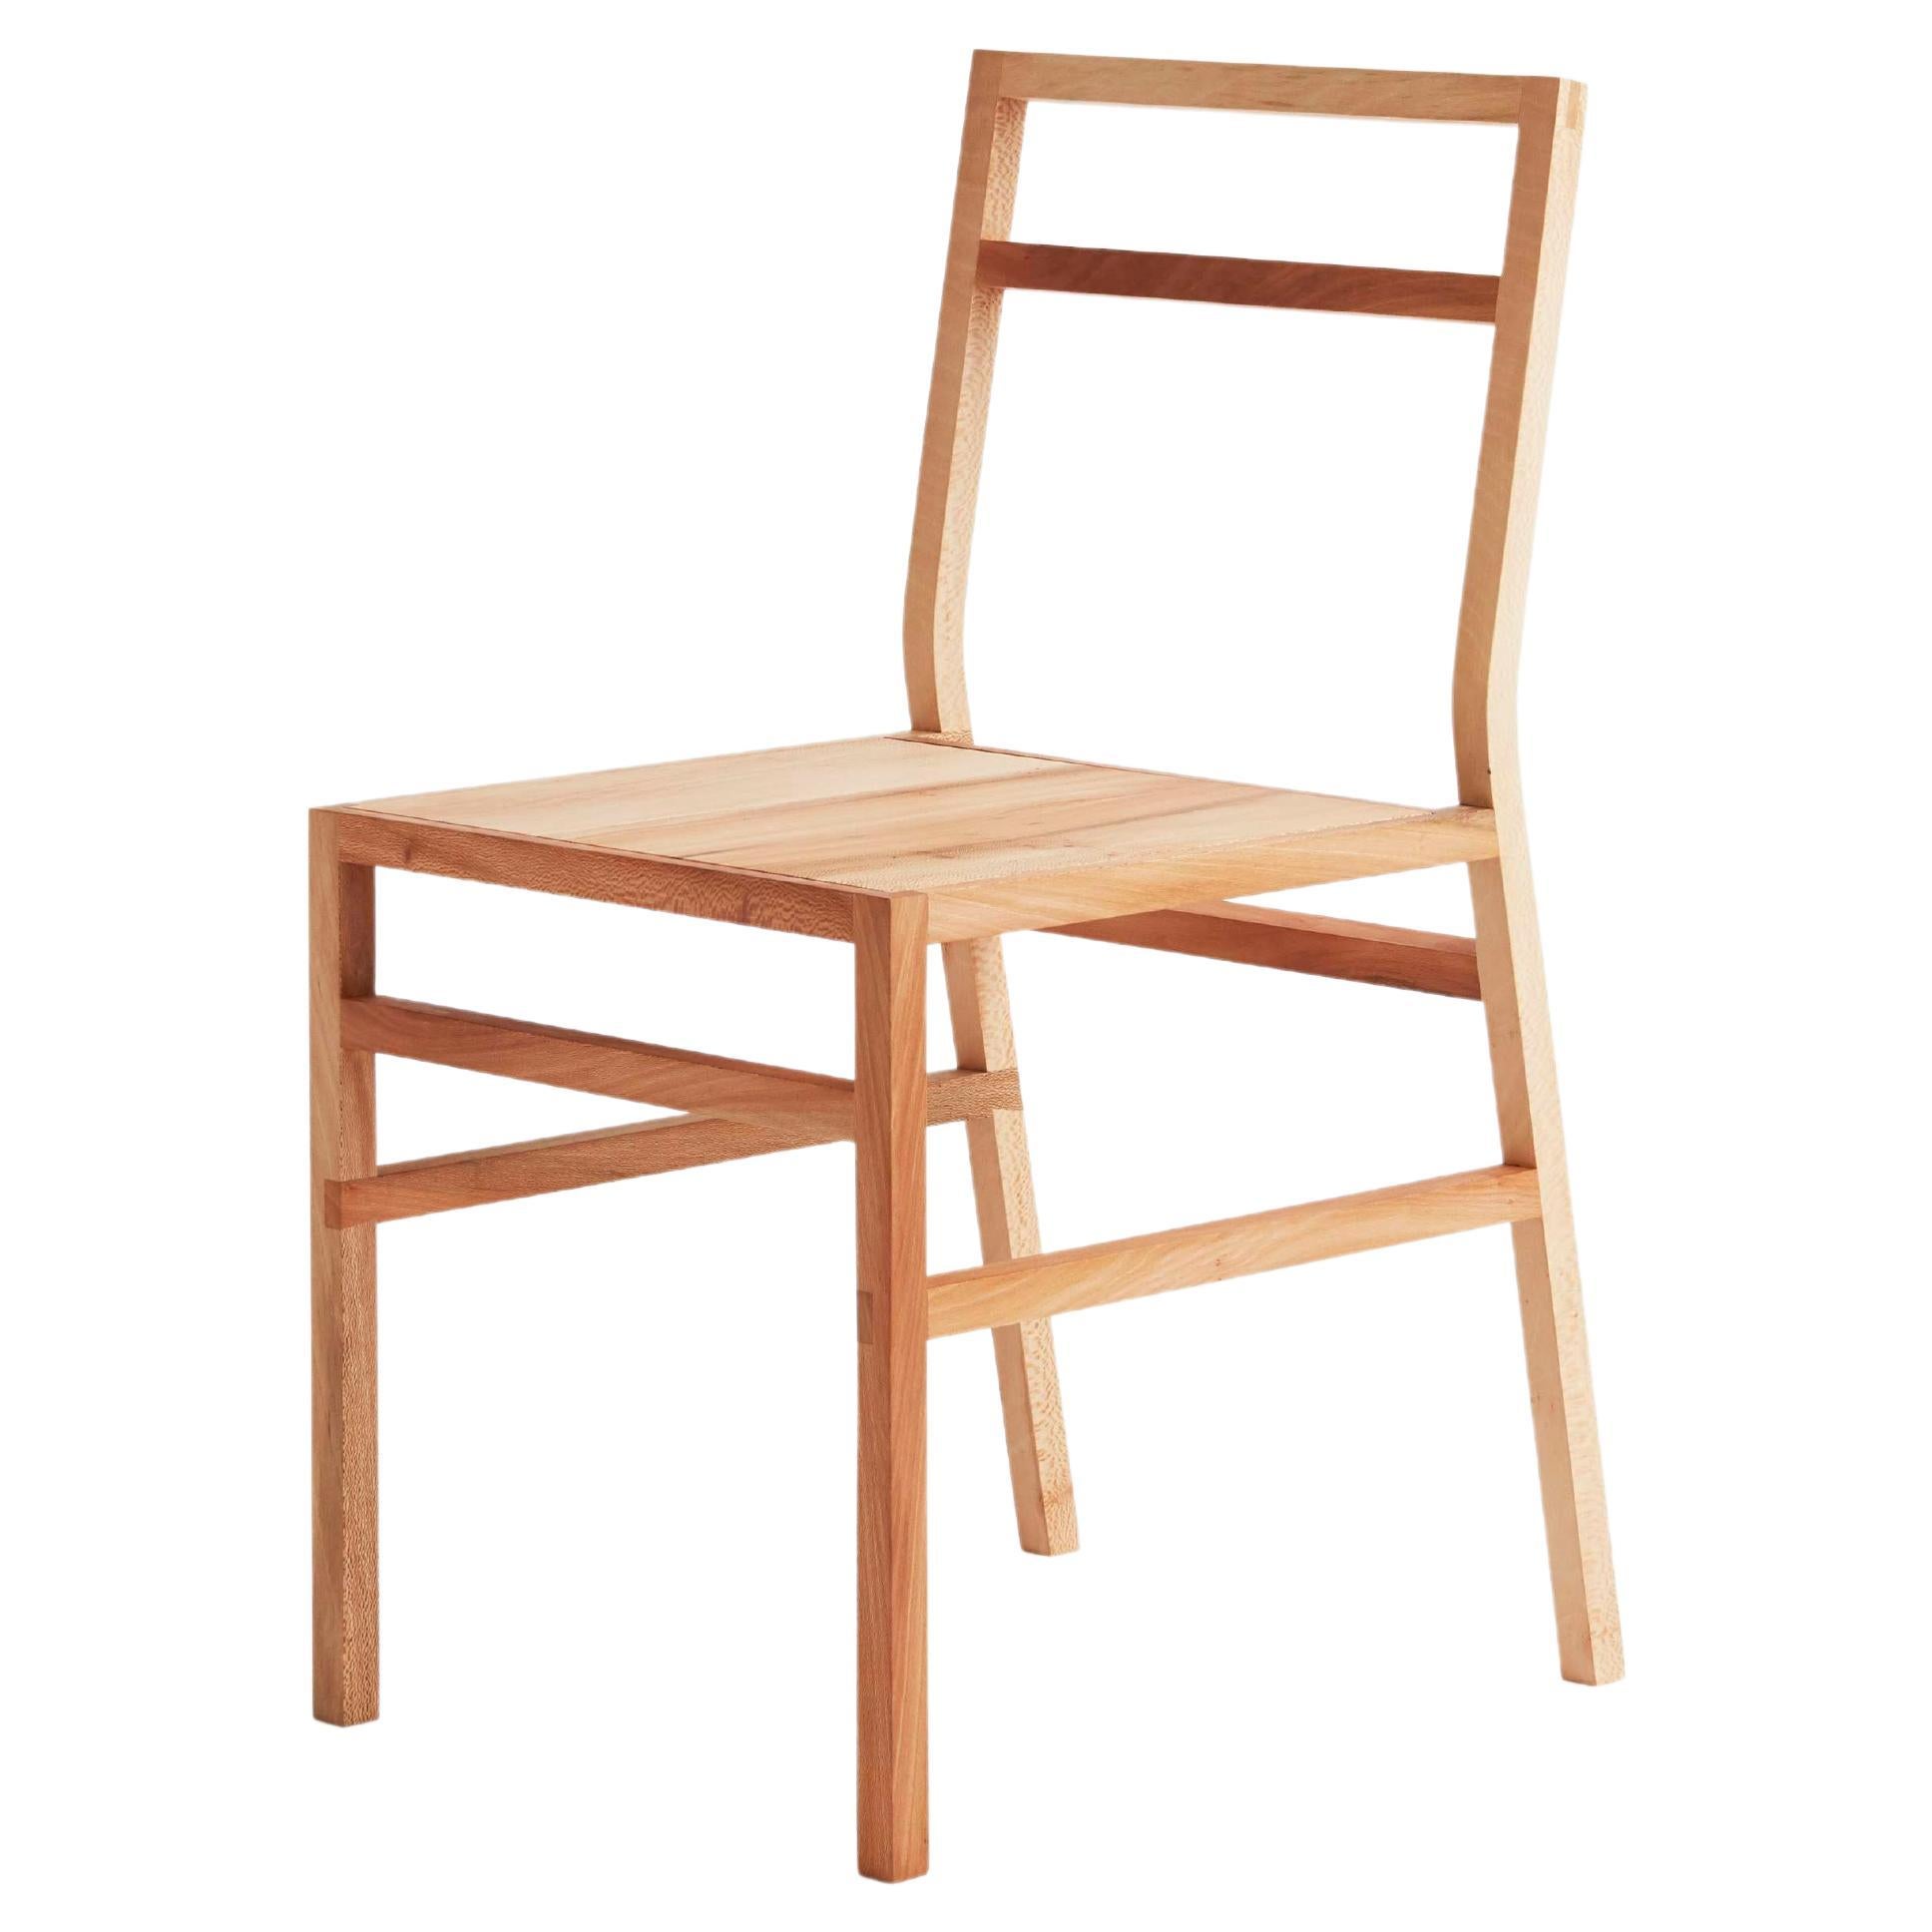 Organic Modernity Dining Chair, Solid Wood, London Plane, Handmade by Loose Fit, UK